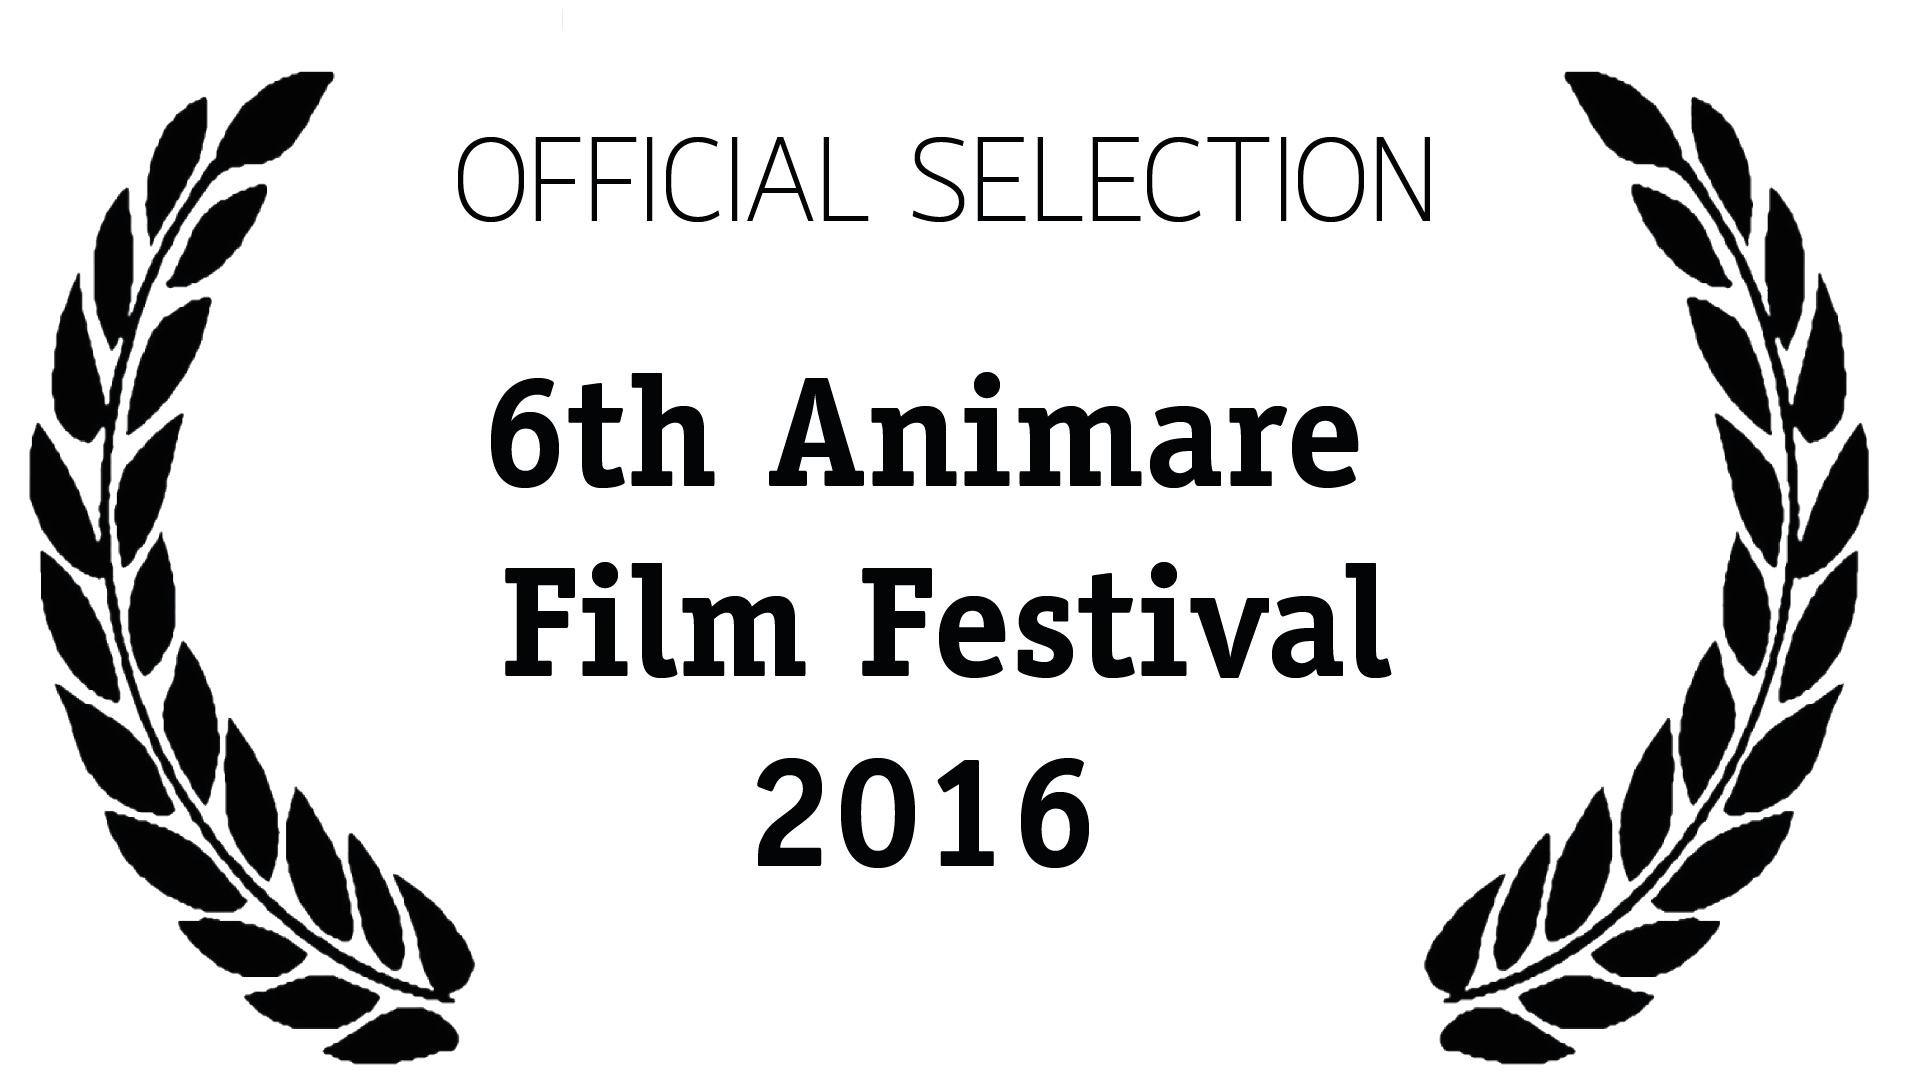 Official selection: 6th Animare Film Festival 2016